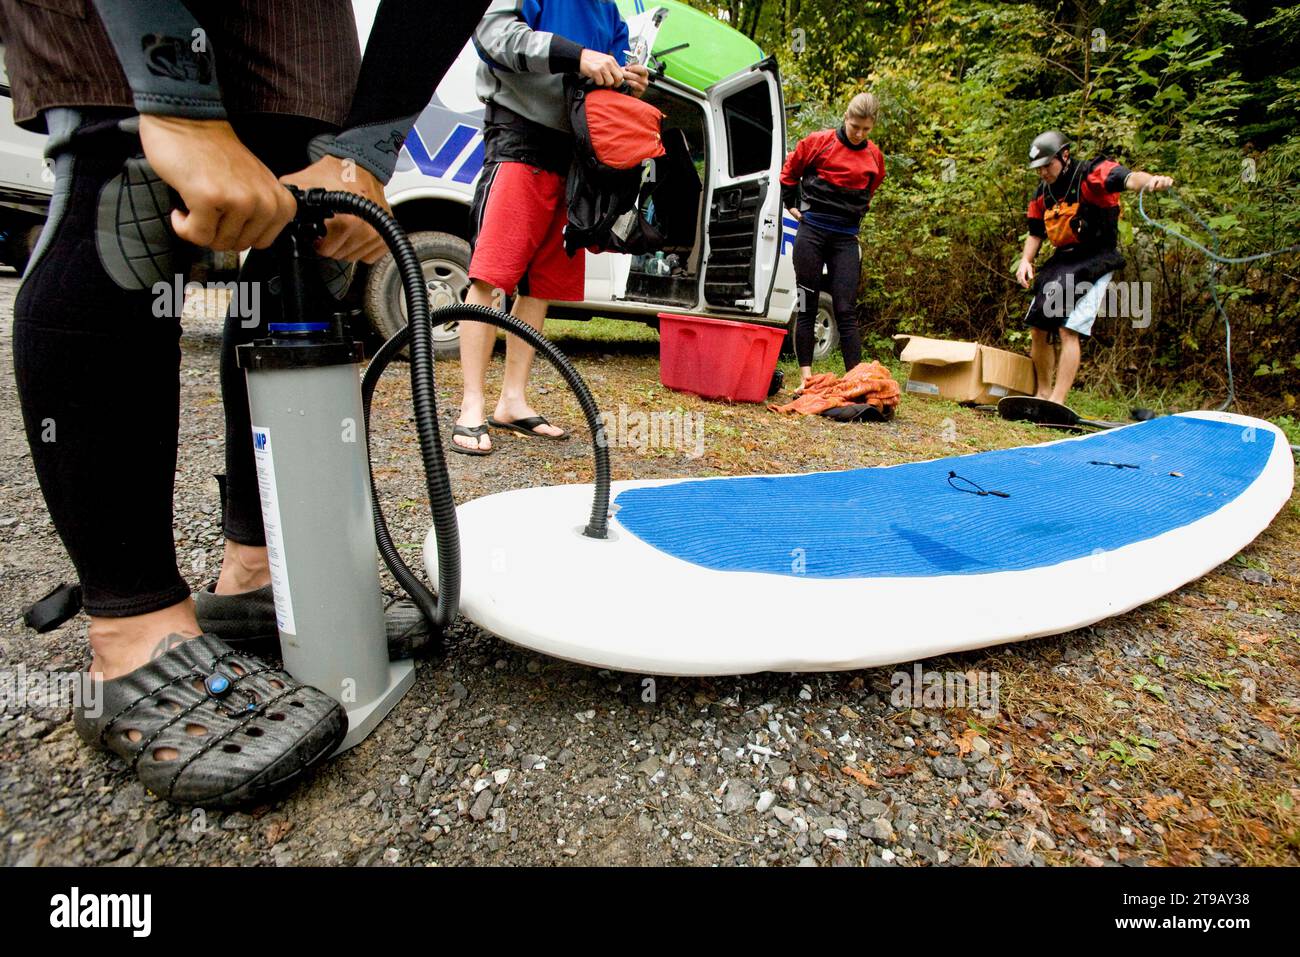 Man inflating a stand up paddleboard with friends getting ready to go kayaking. Stock Photo